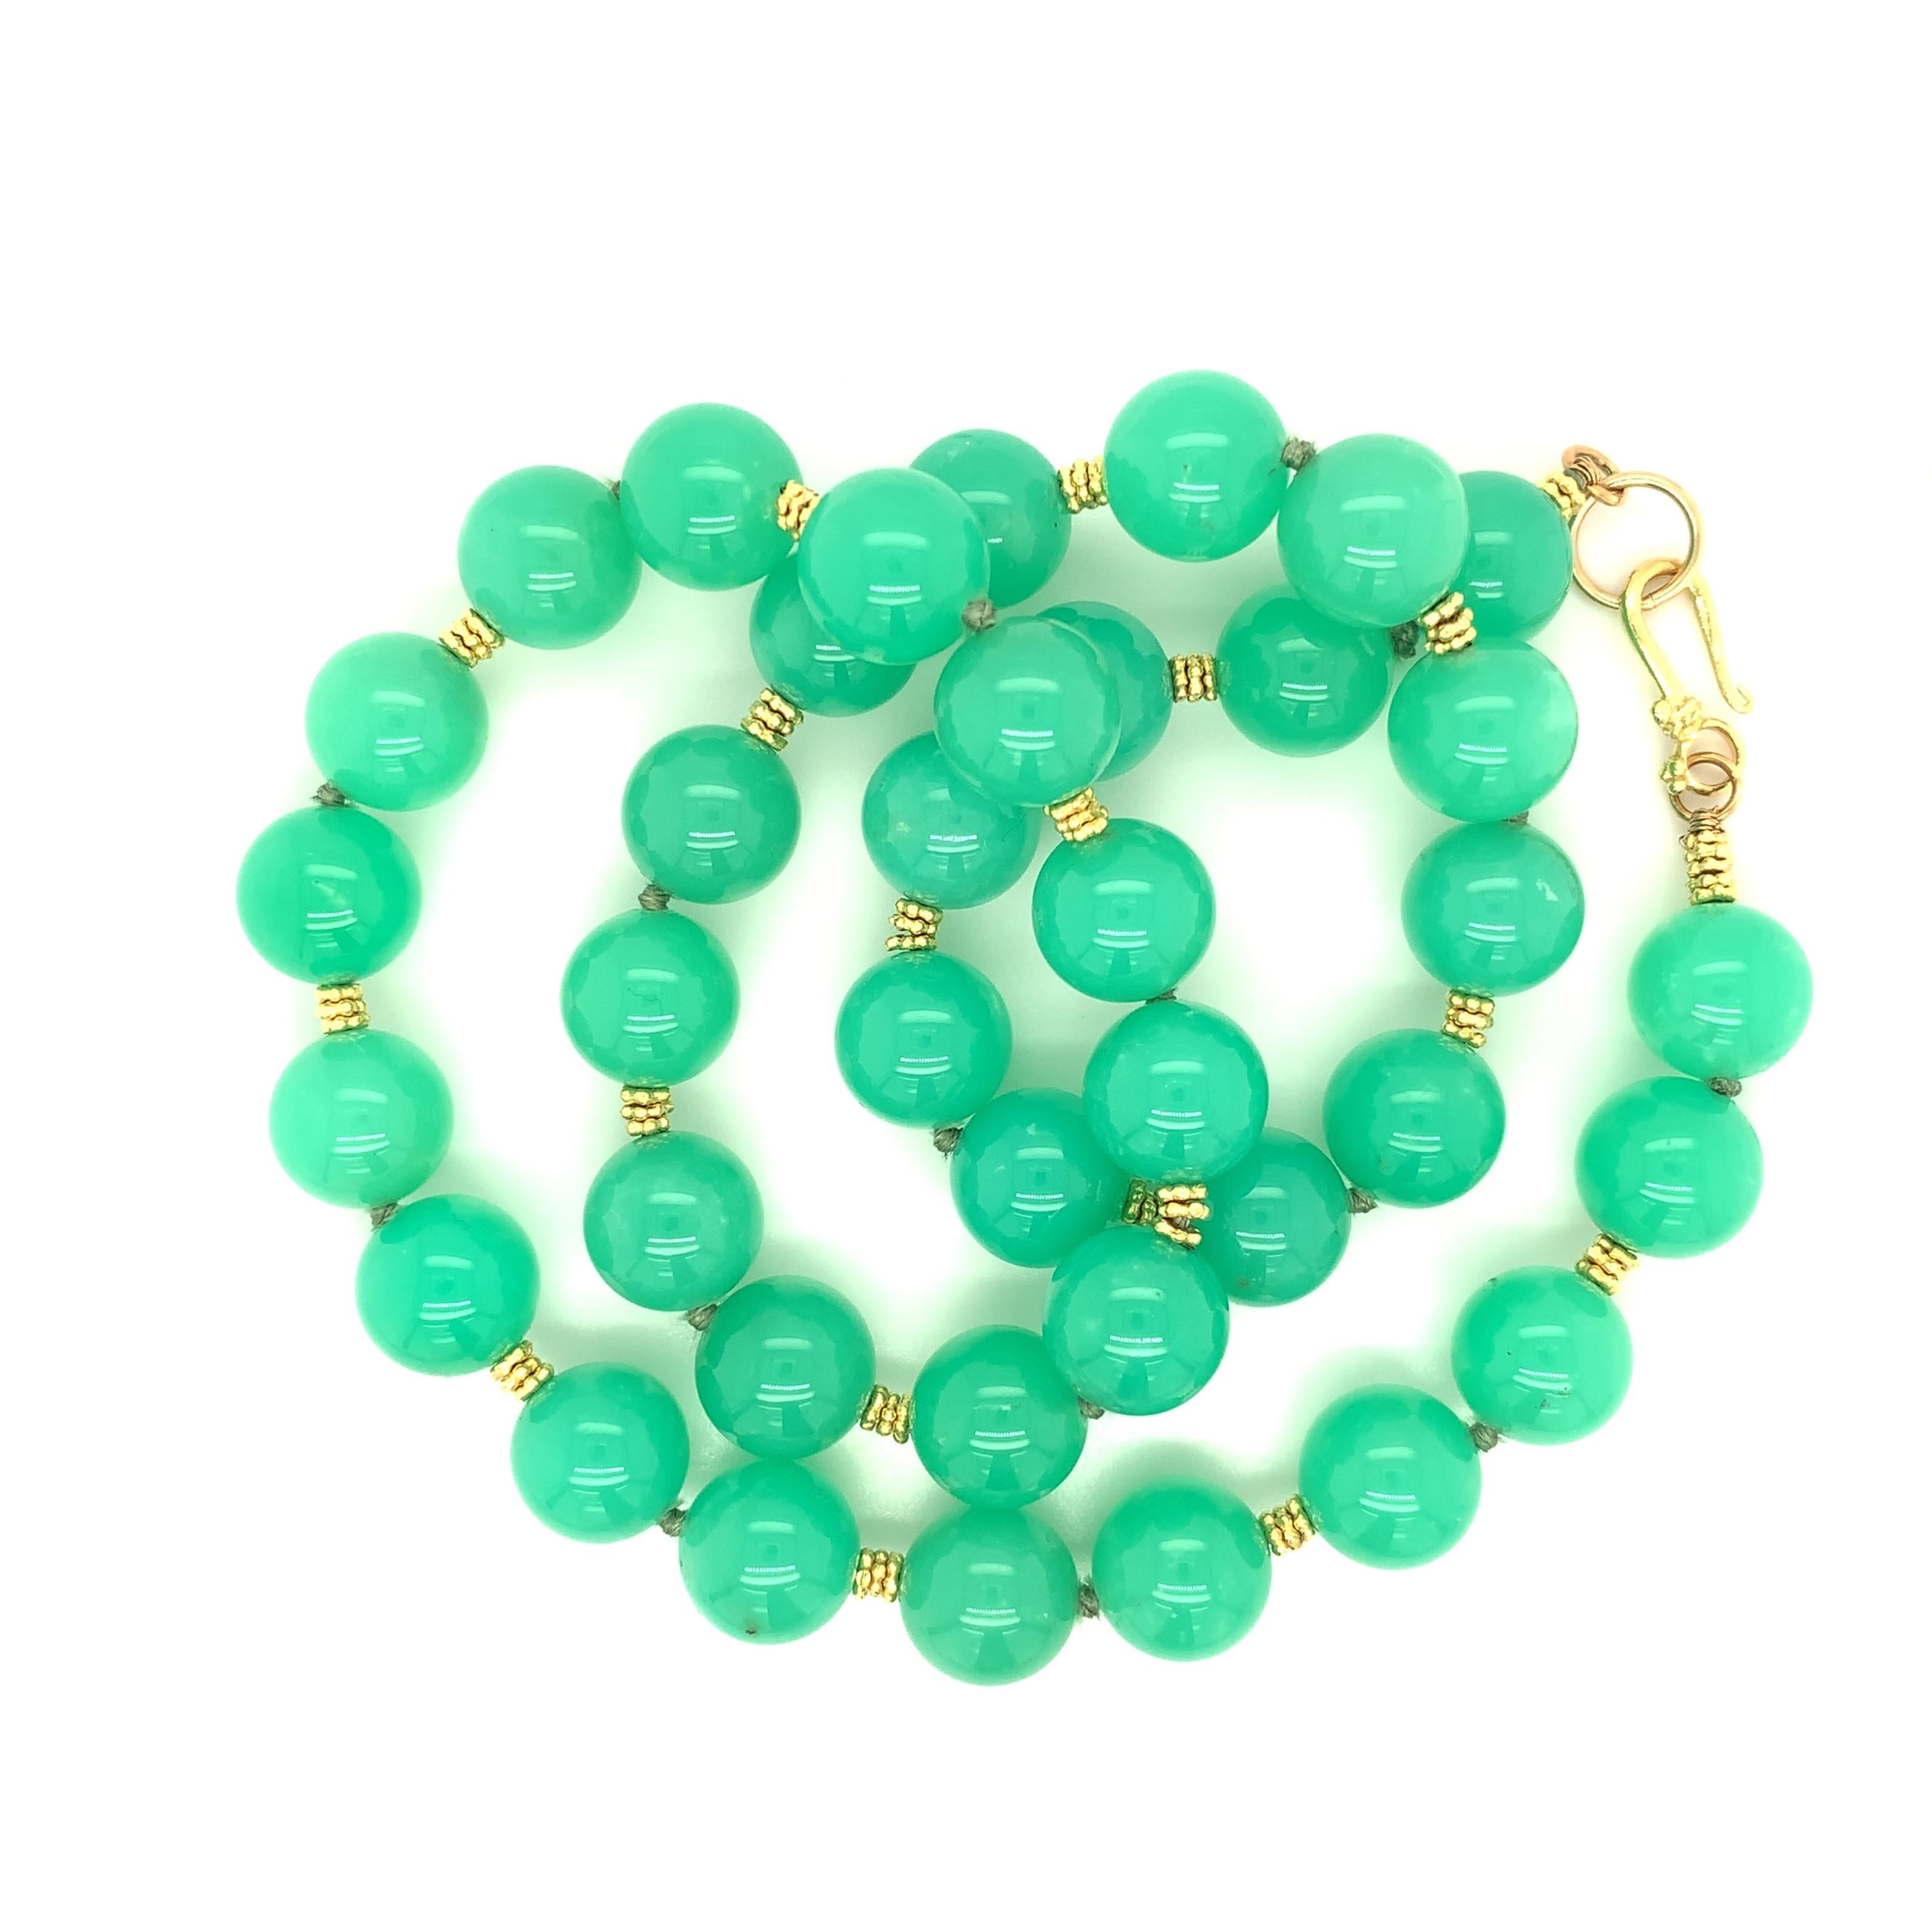 This glorious necklace features a strand of 11.00 millimeter fine chrysoprase beads of stunning color and quality. Chrysoprase is a variety of the gem material, chalcedony. These apple green beads are semi-translucent with beautiful luster, and have